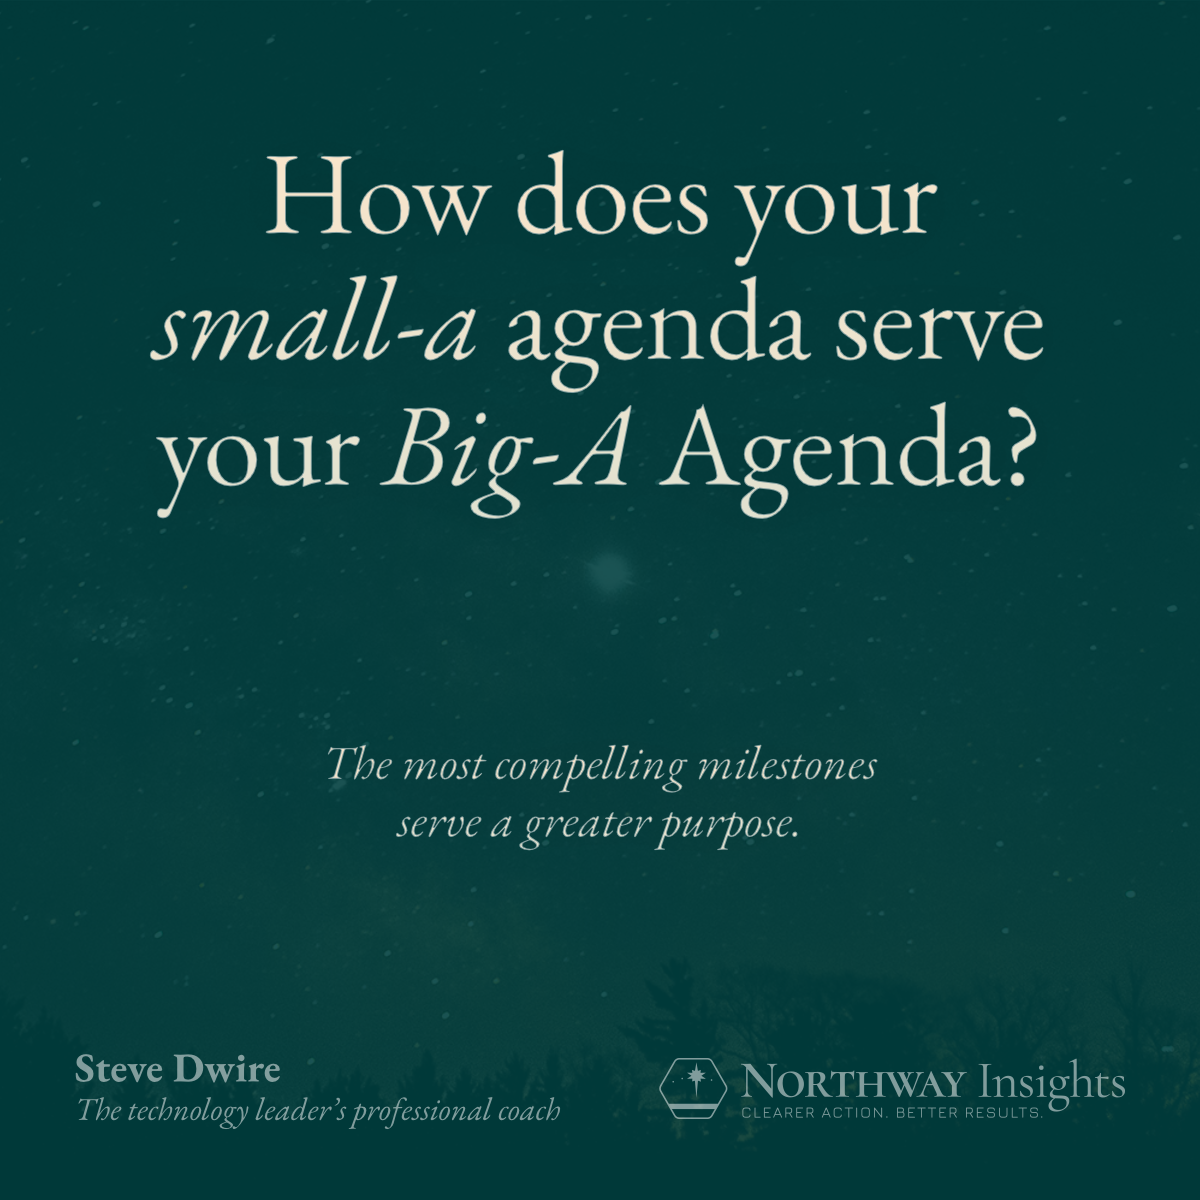 How does your small-a agenda serve your Big-A Agenda? (The most compelling milestones serve a greater purpose.)